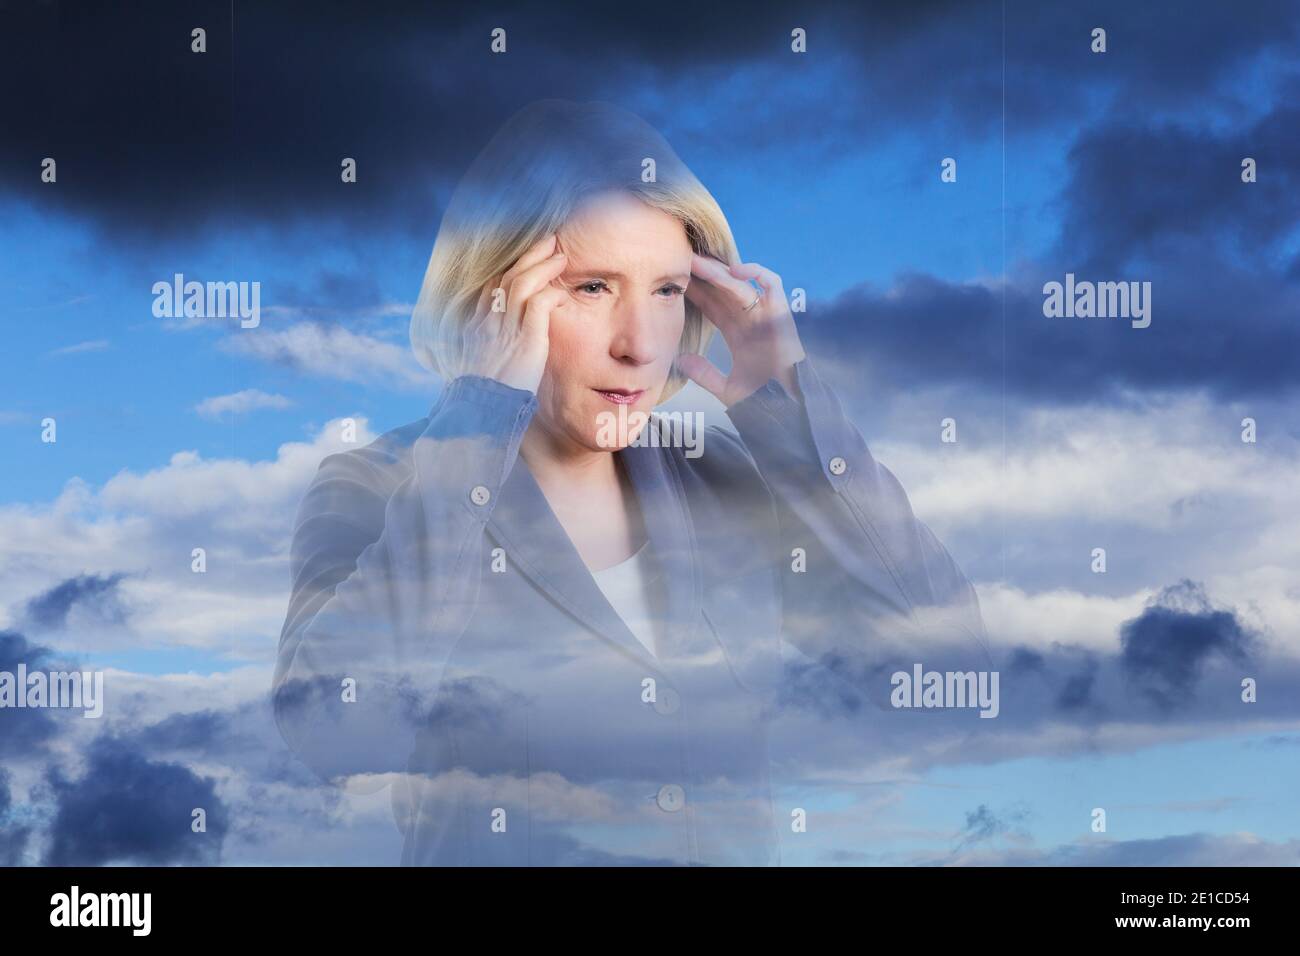 Weather sensitive woman with a headache, double exposure with dark clouds, copy space. Stock Photo